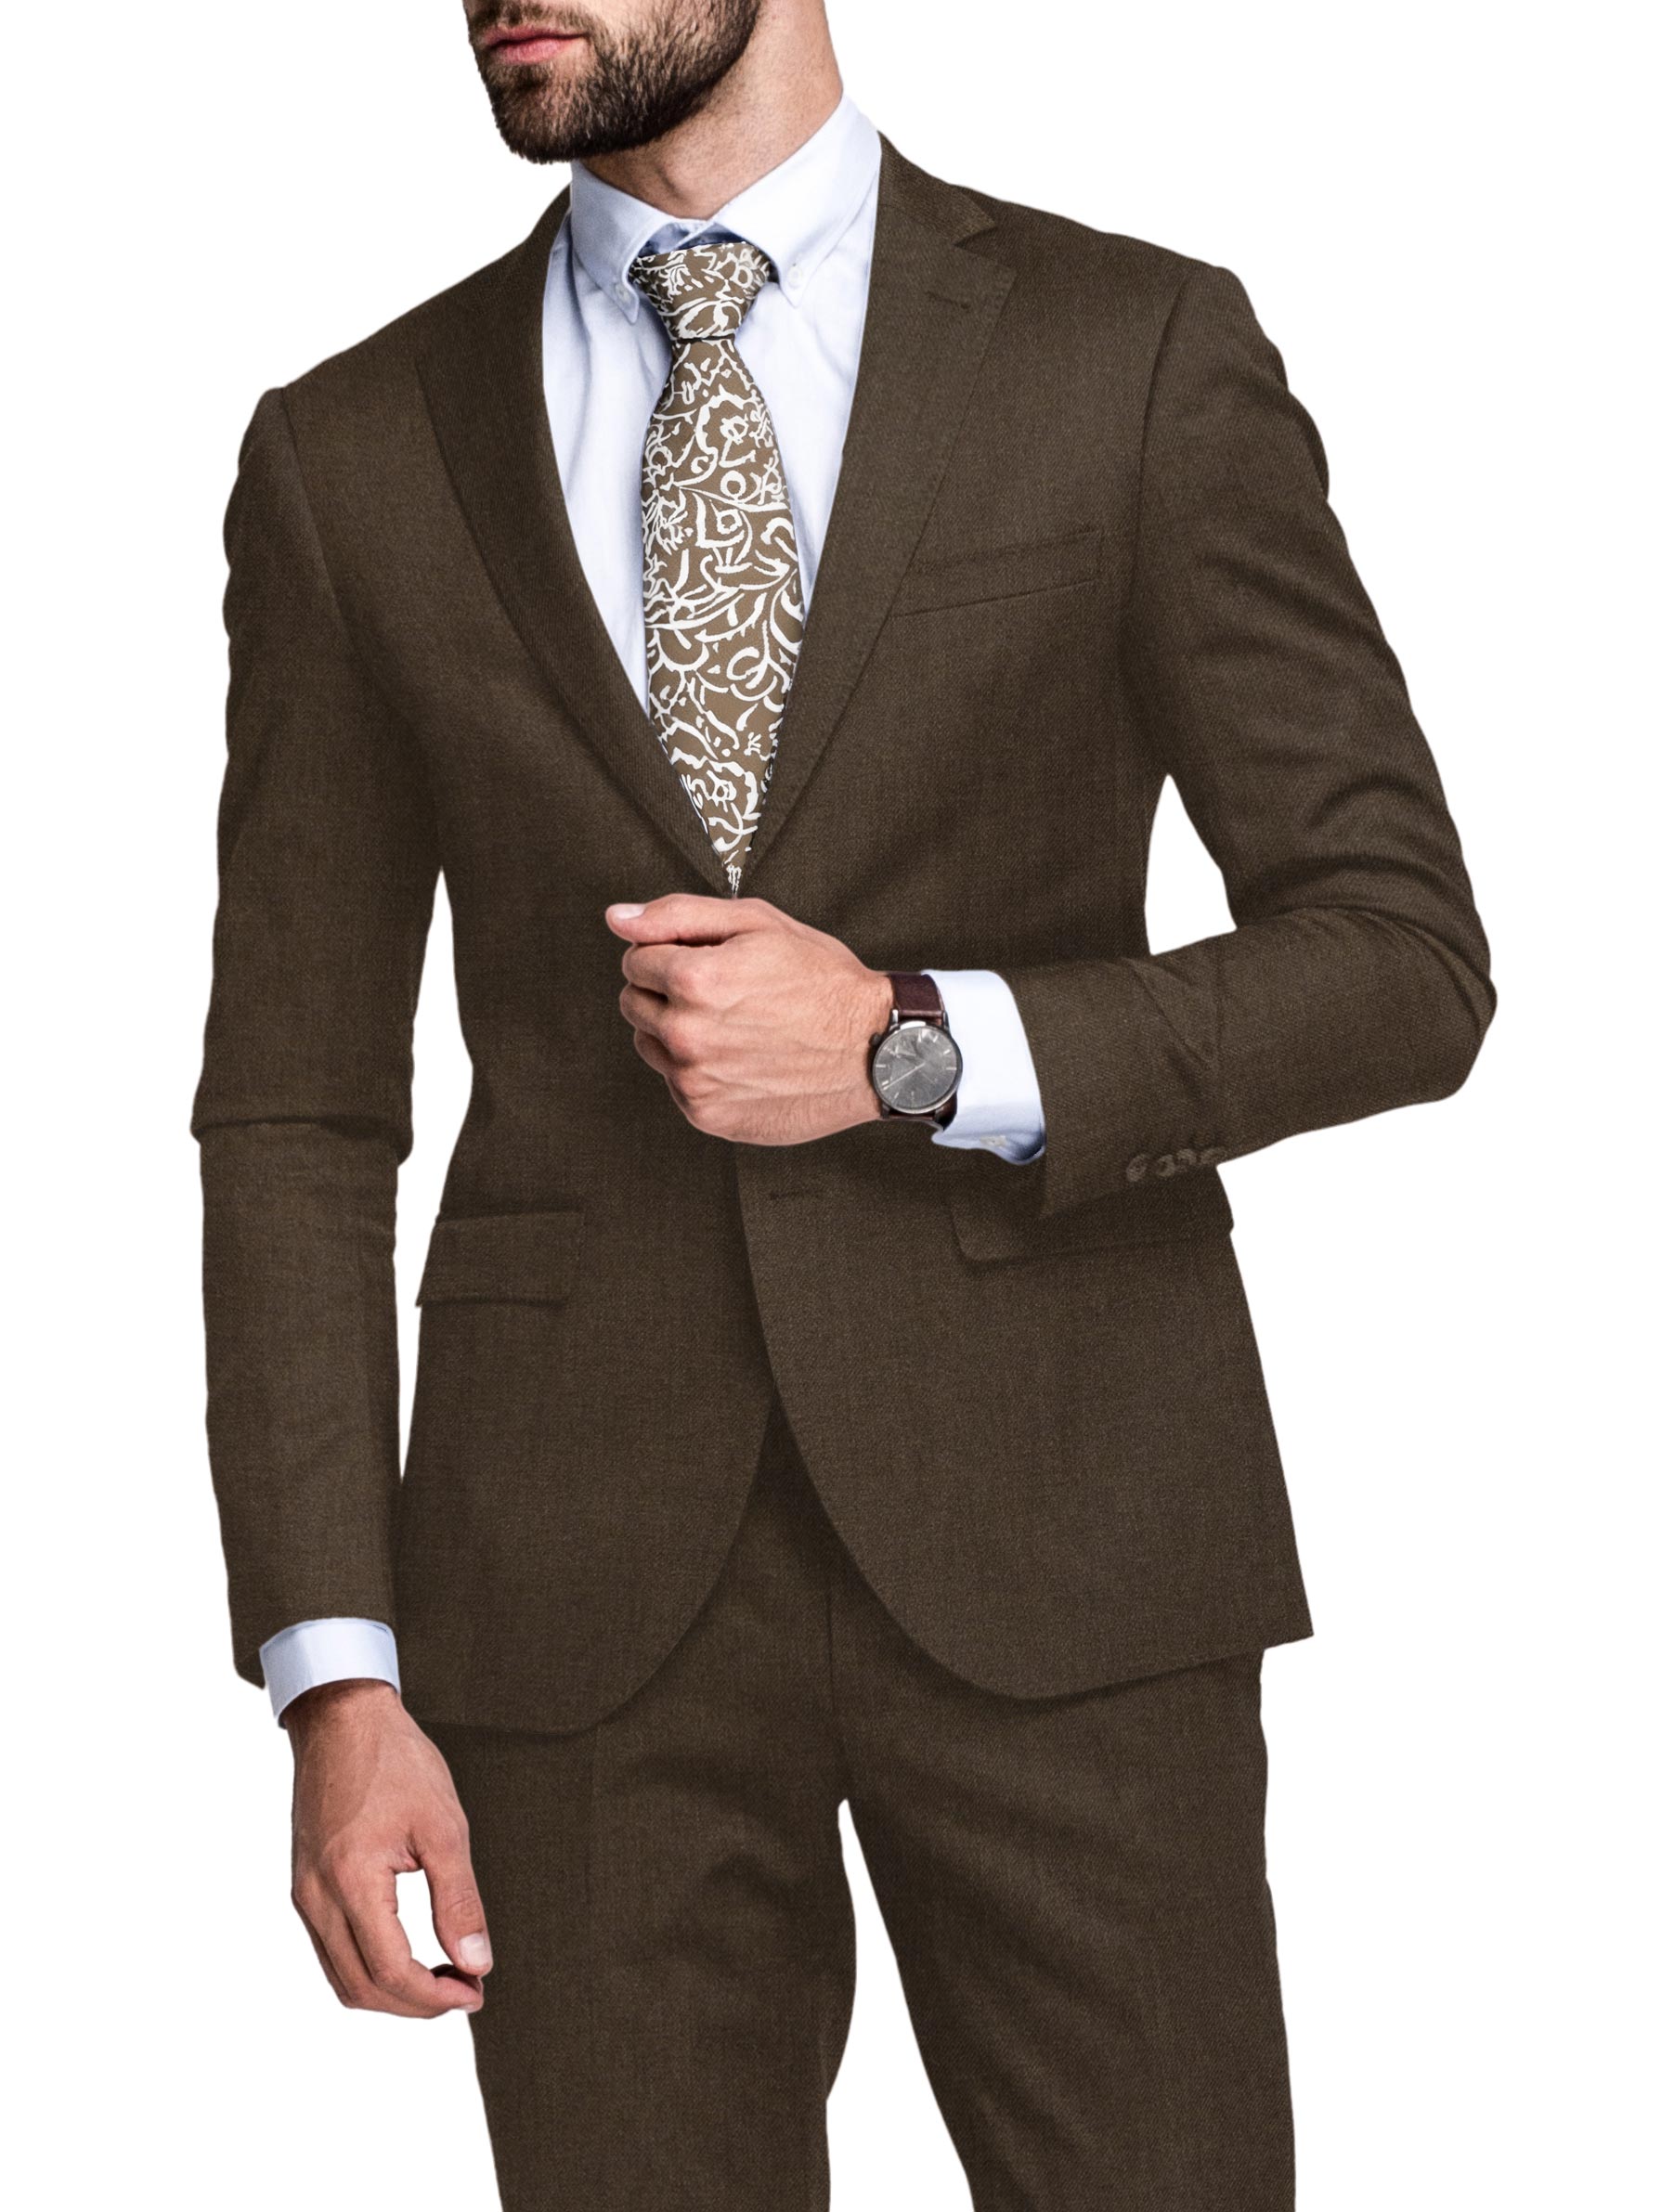 Ocm Suitings & Shirtings in Hyderabad at best price by Fd Khan & Co -  Justdial